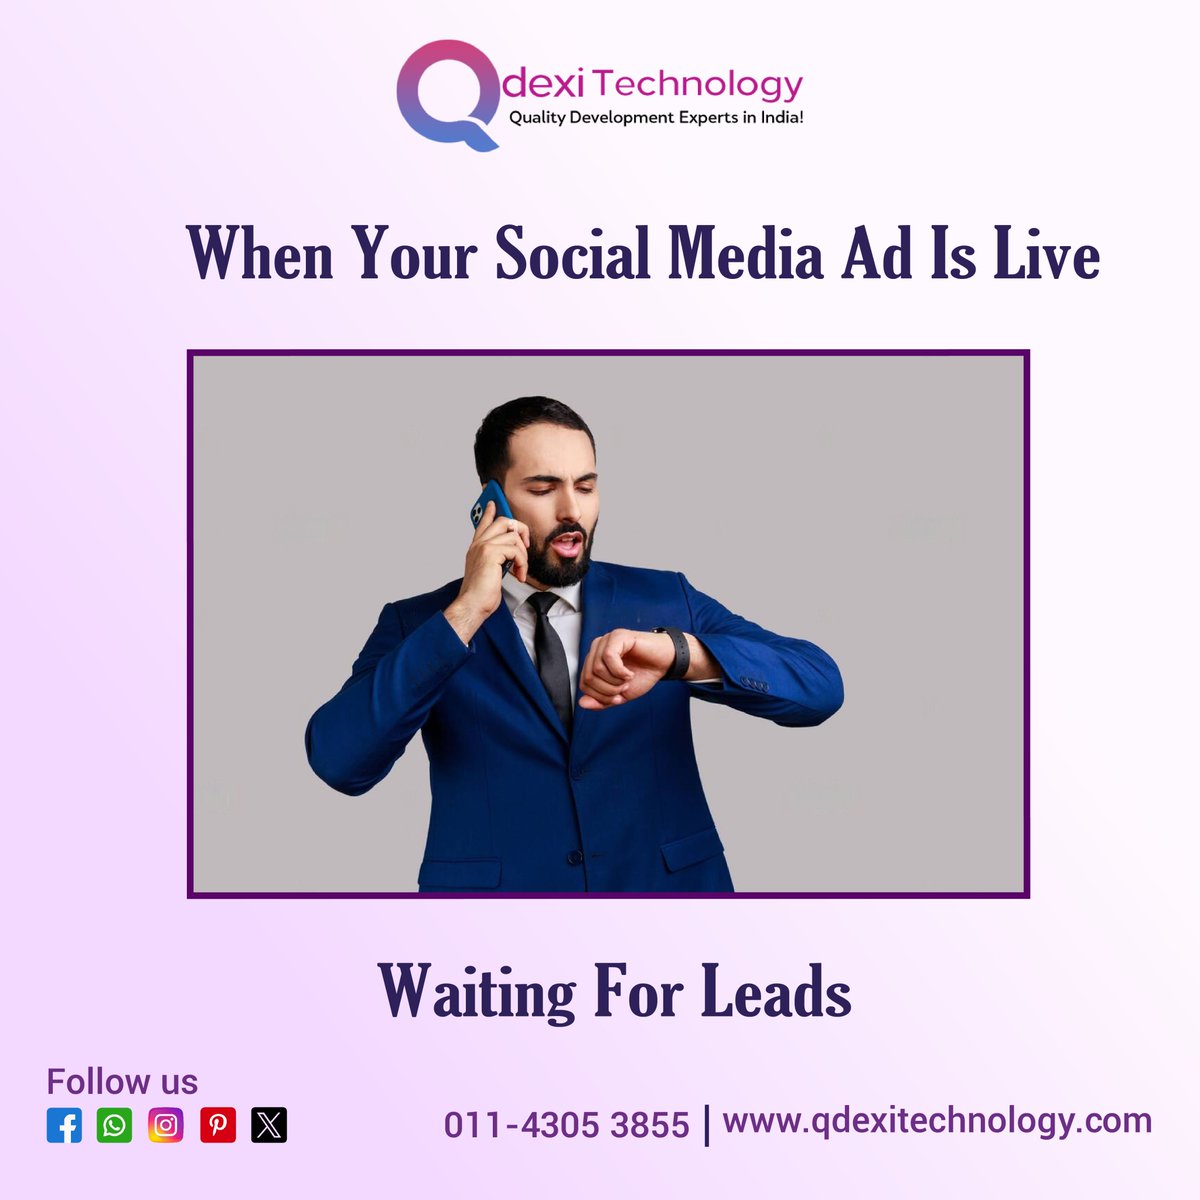 Expert developers in India ensure quality, timely delivery, and lead generation for live social media ads. Qdexi Technology: Quality Solutions, Innovative Approach.

#QualityDevelopment #IndiaExperts #SocialMediaAds #LeadGeneration #TimelyDelivery